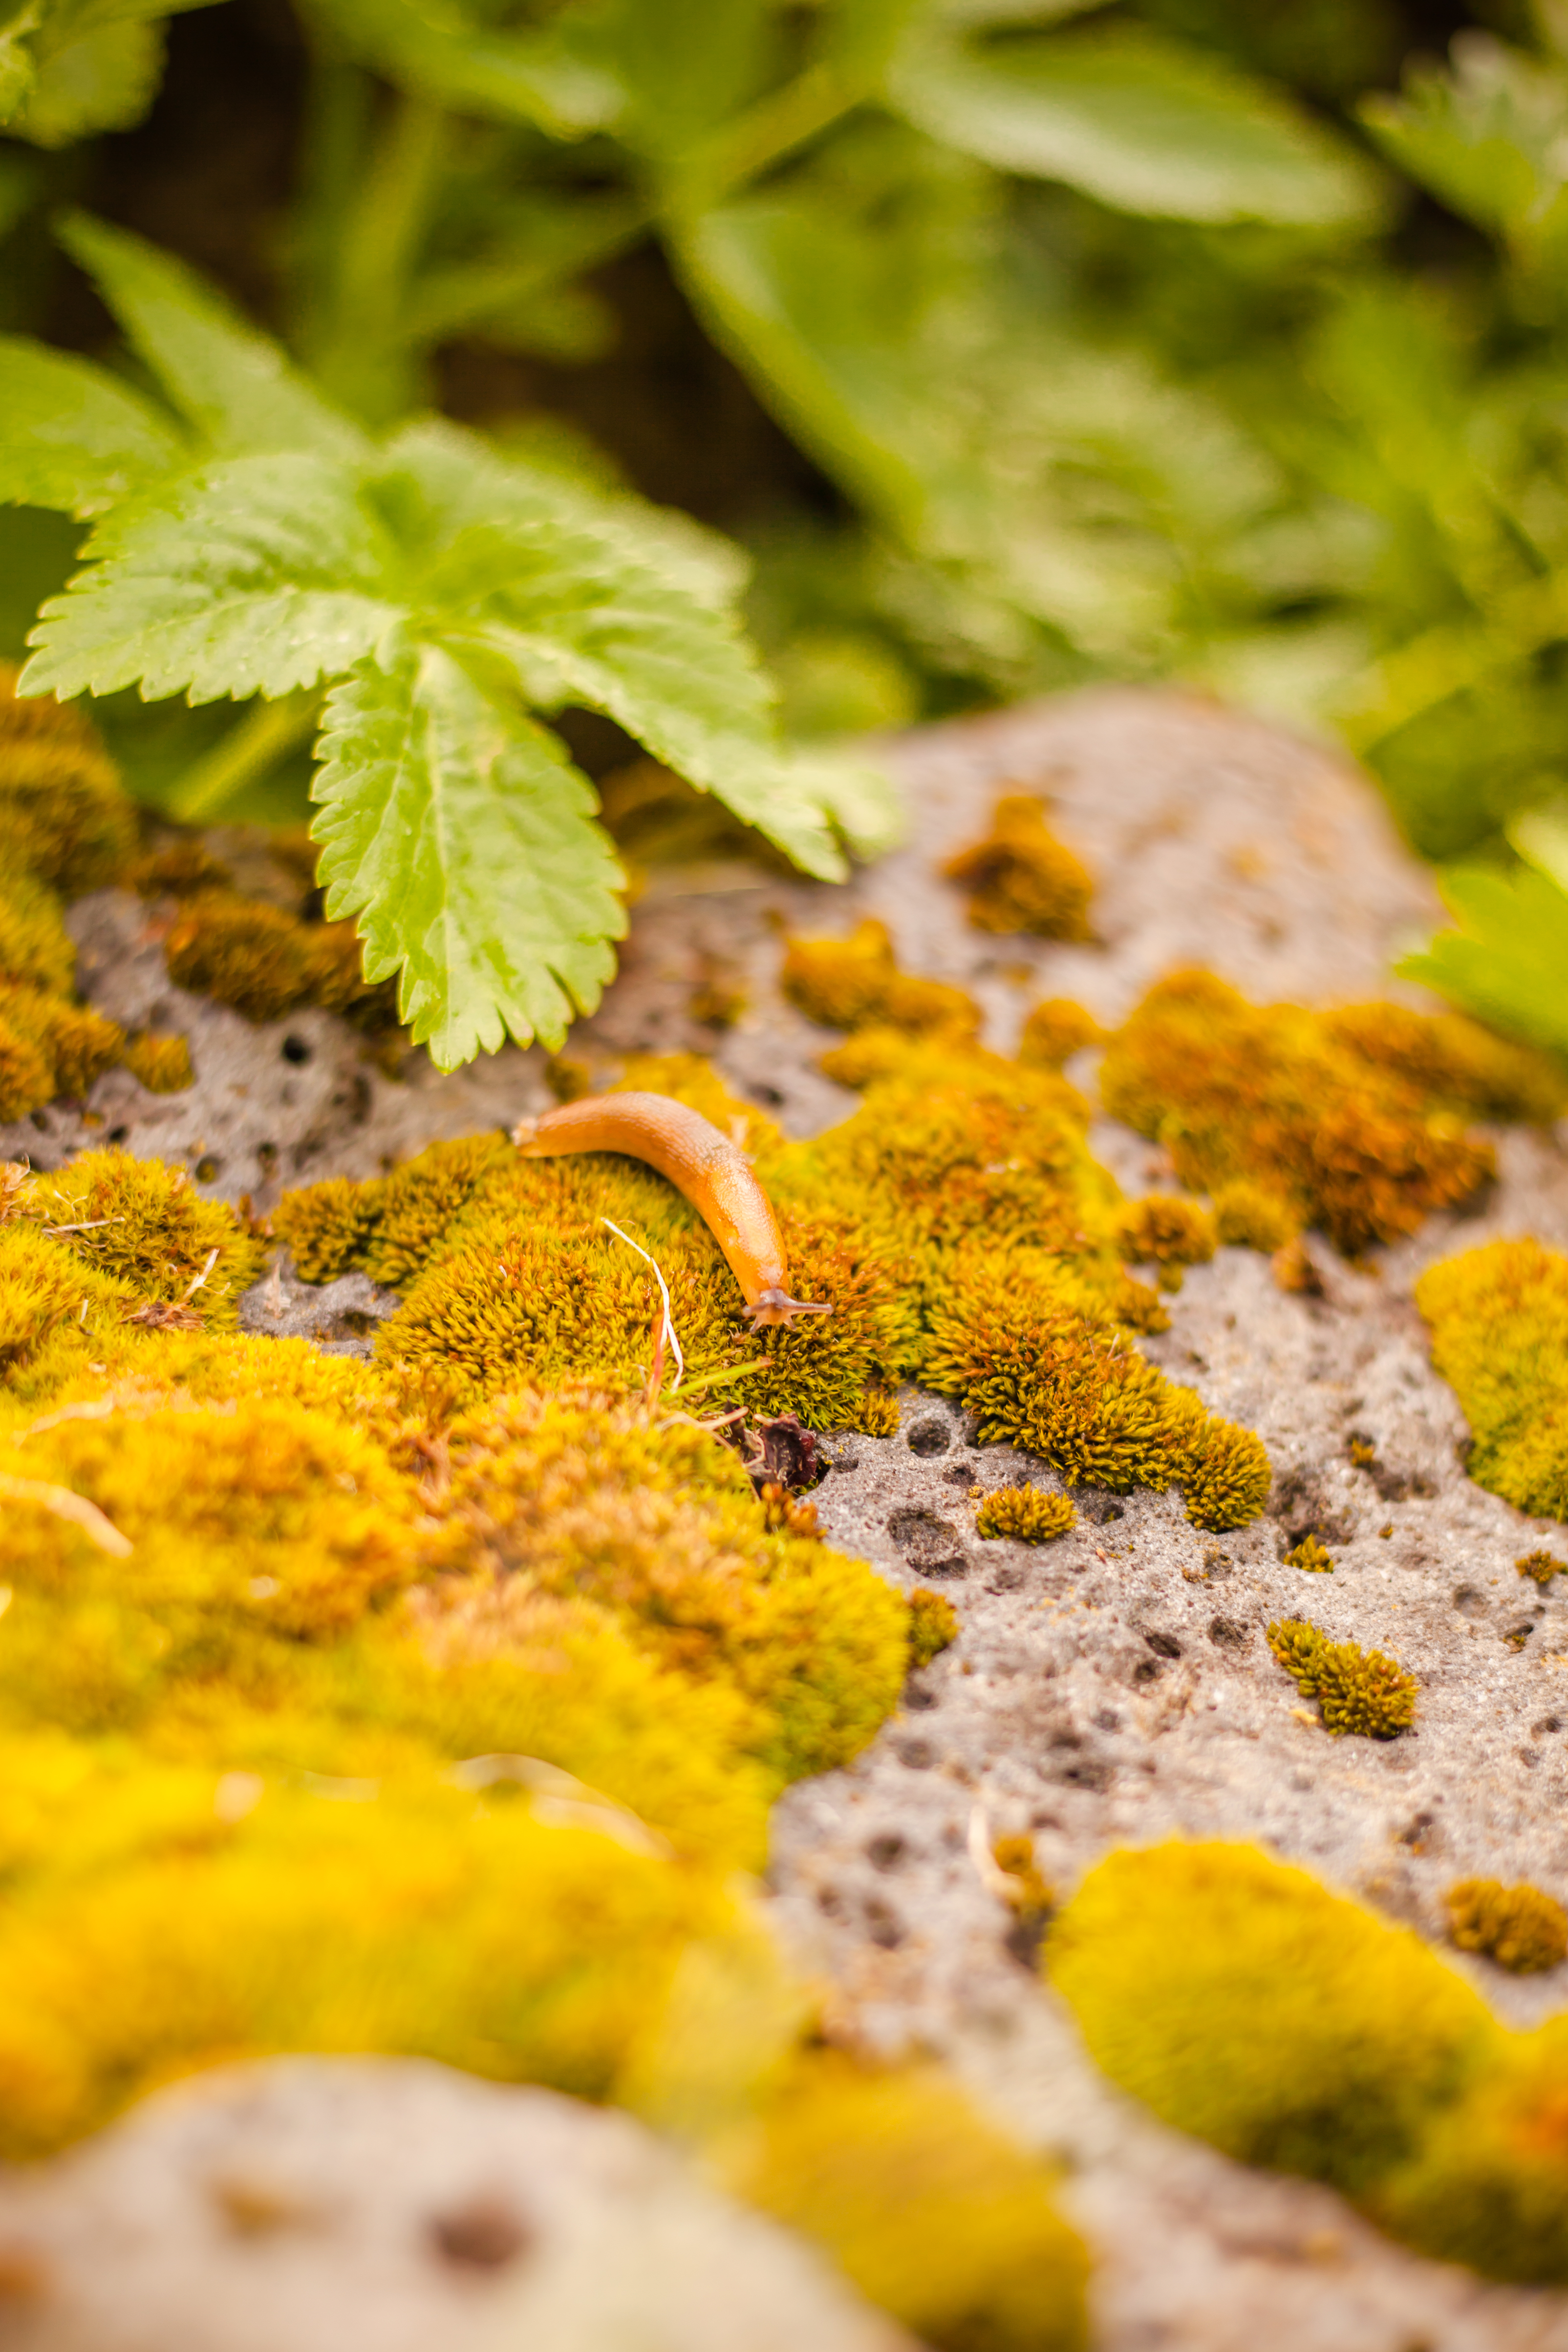 Small Snail on Moss, Animal, Depth, Insect, Moss, HQ Photo